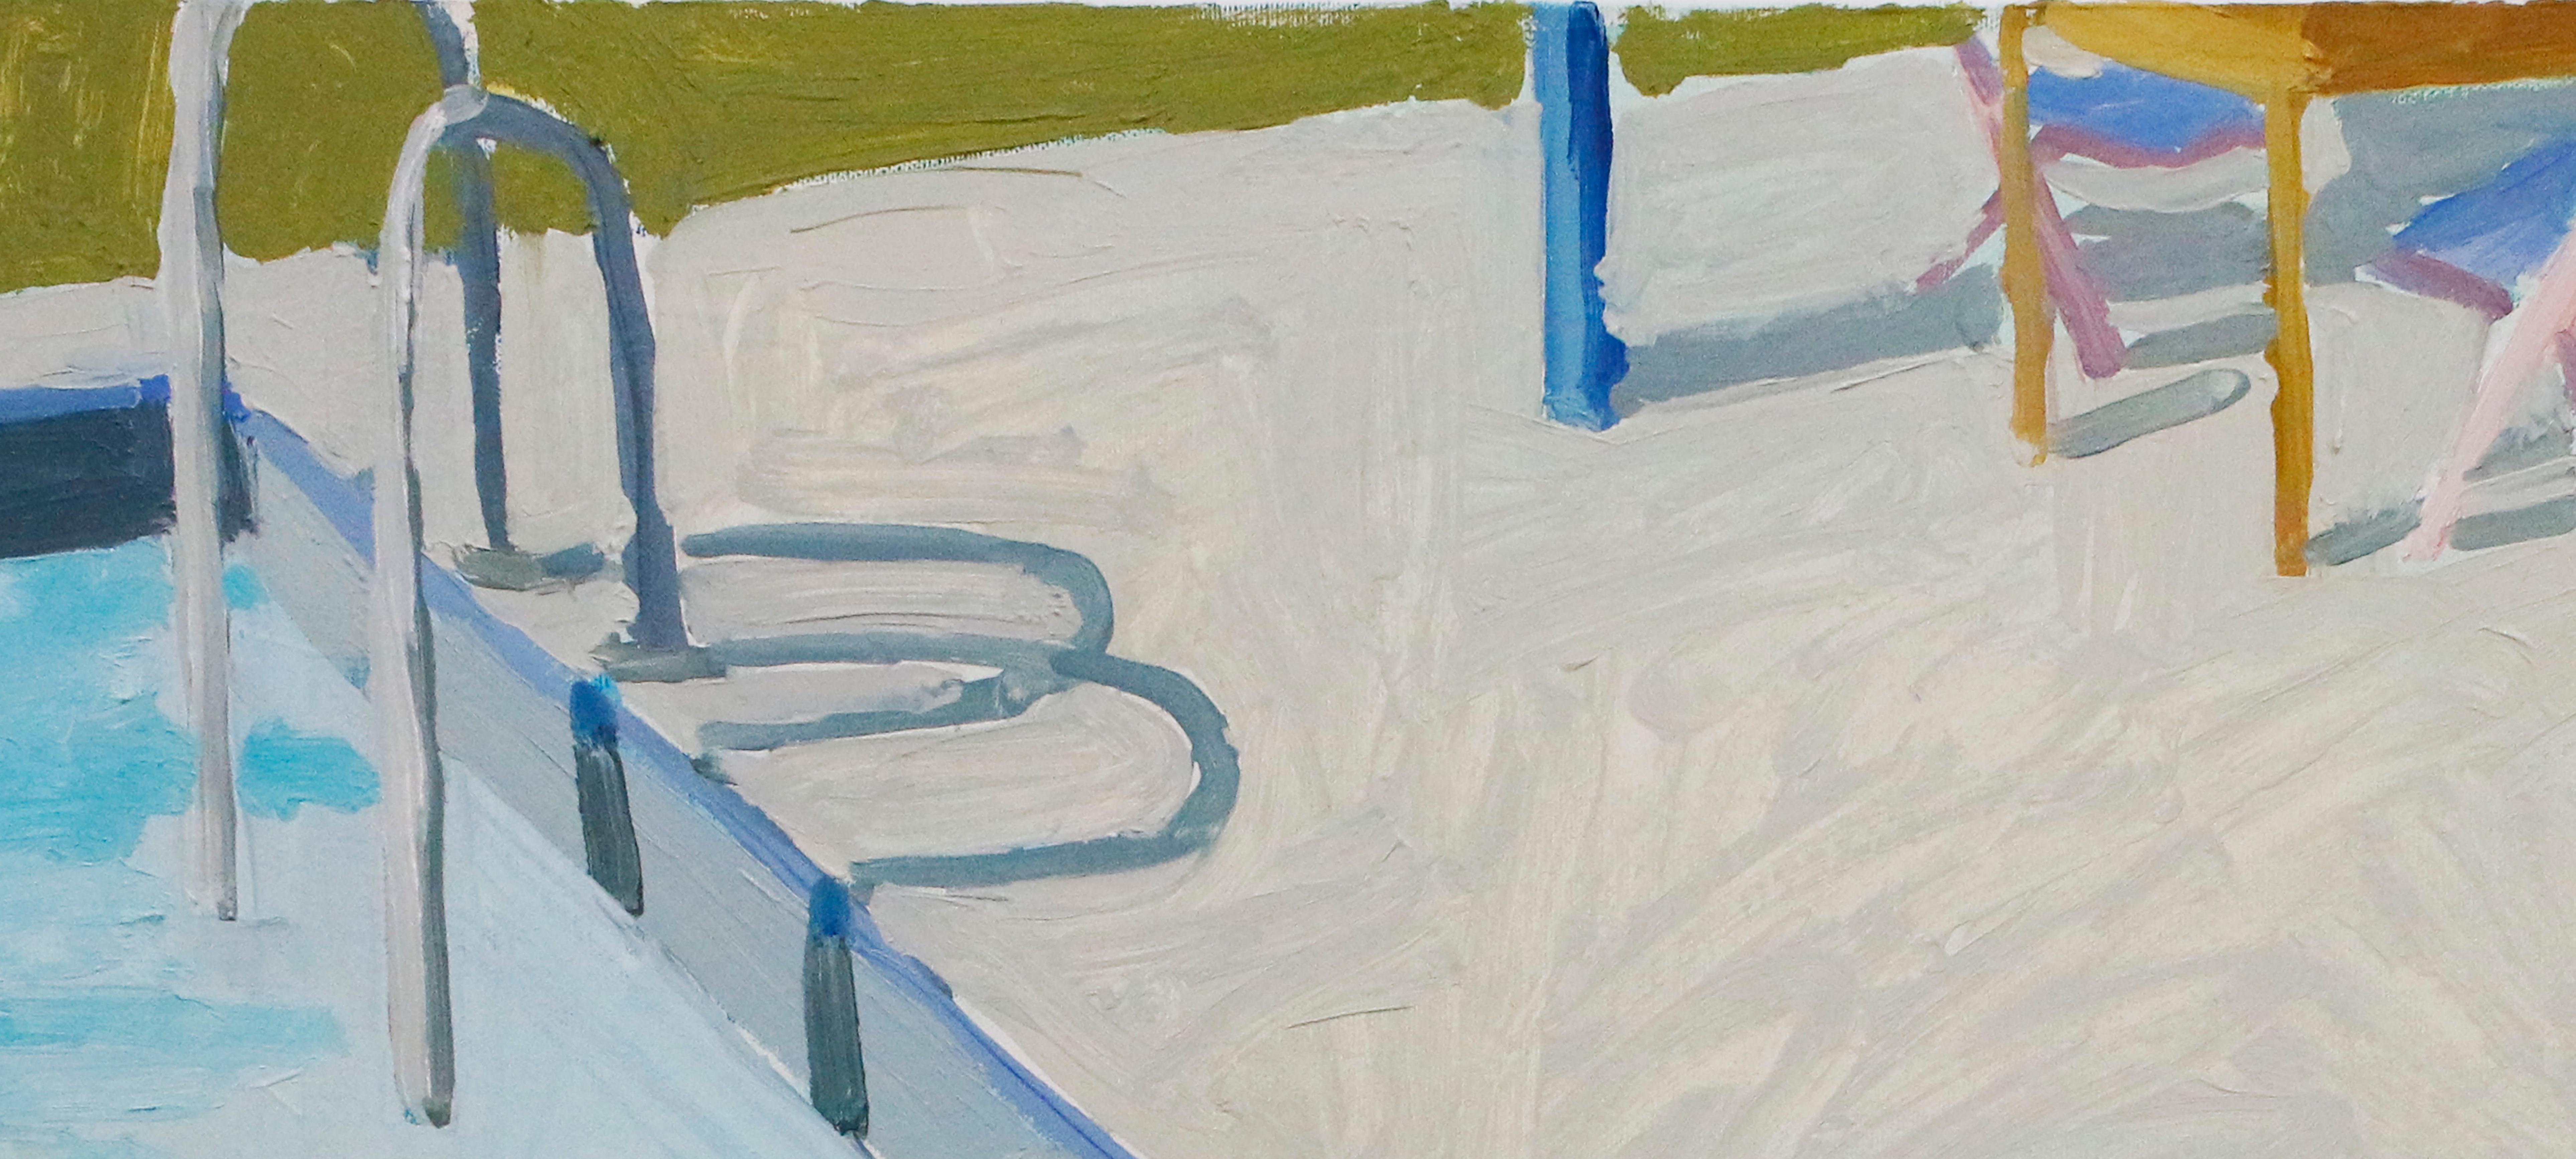 Salad Days, Hose, Landscape Painting with Pool and Hose in Soft Blue and Green  3